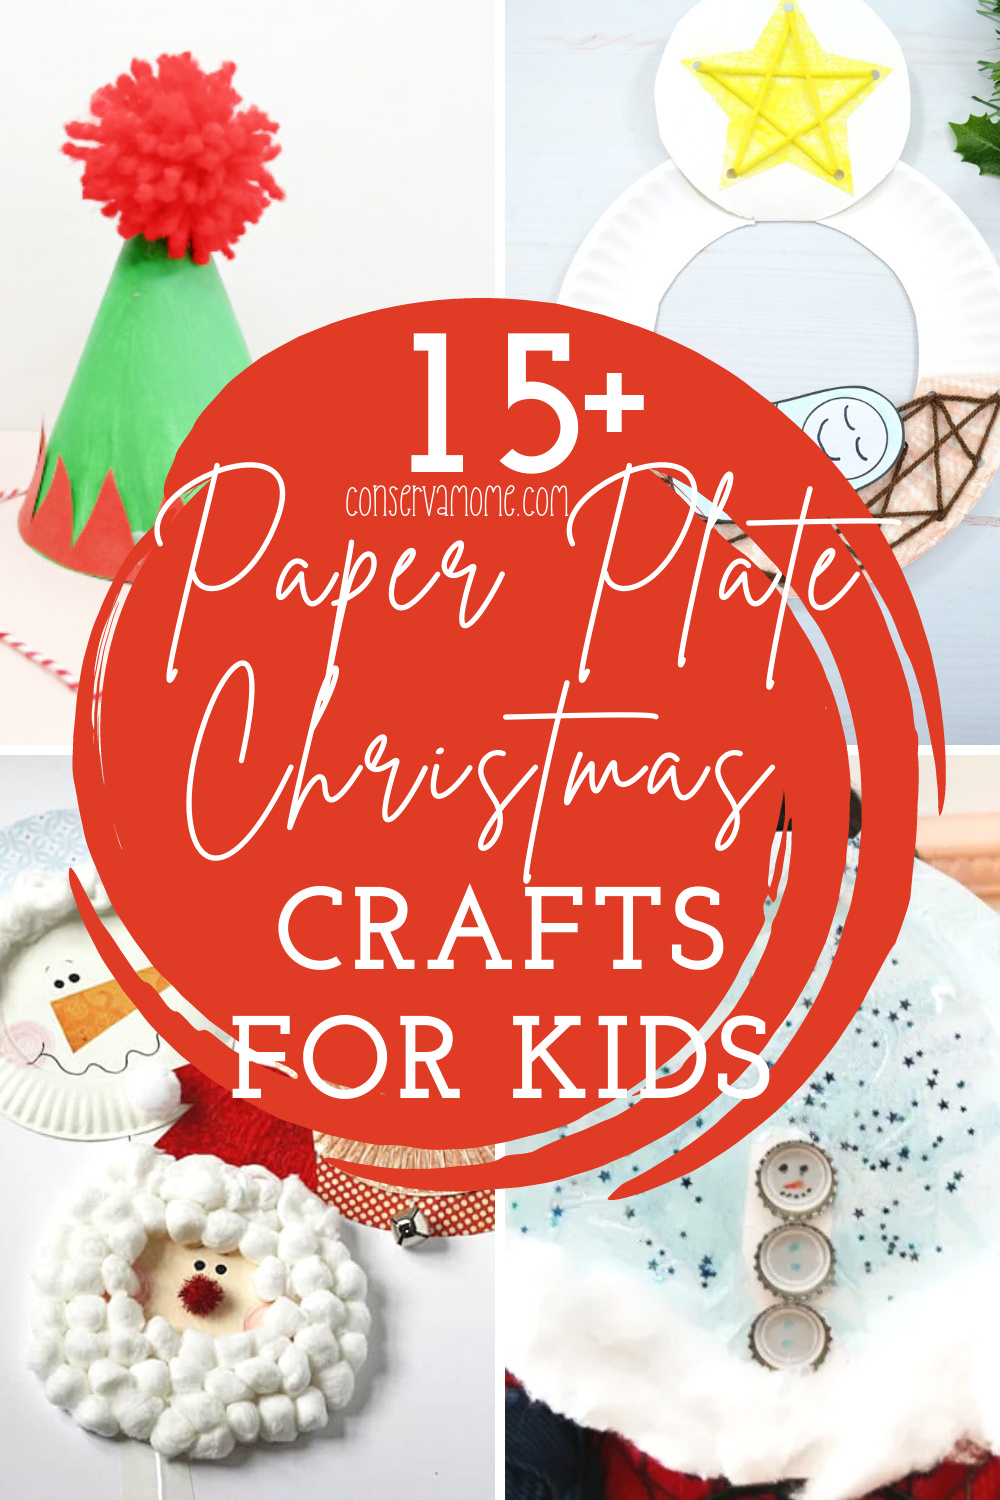 Paper plate Christmas crafts